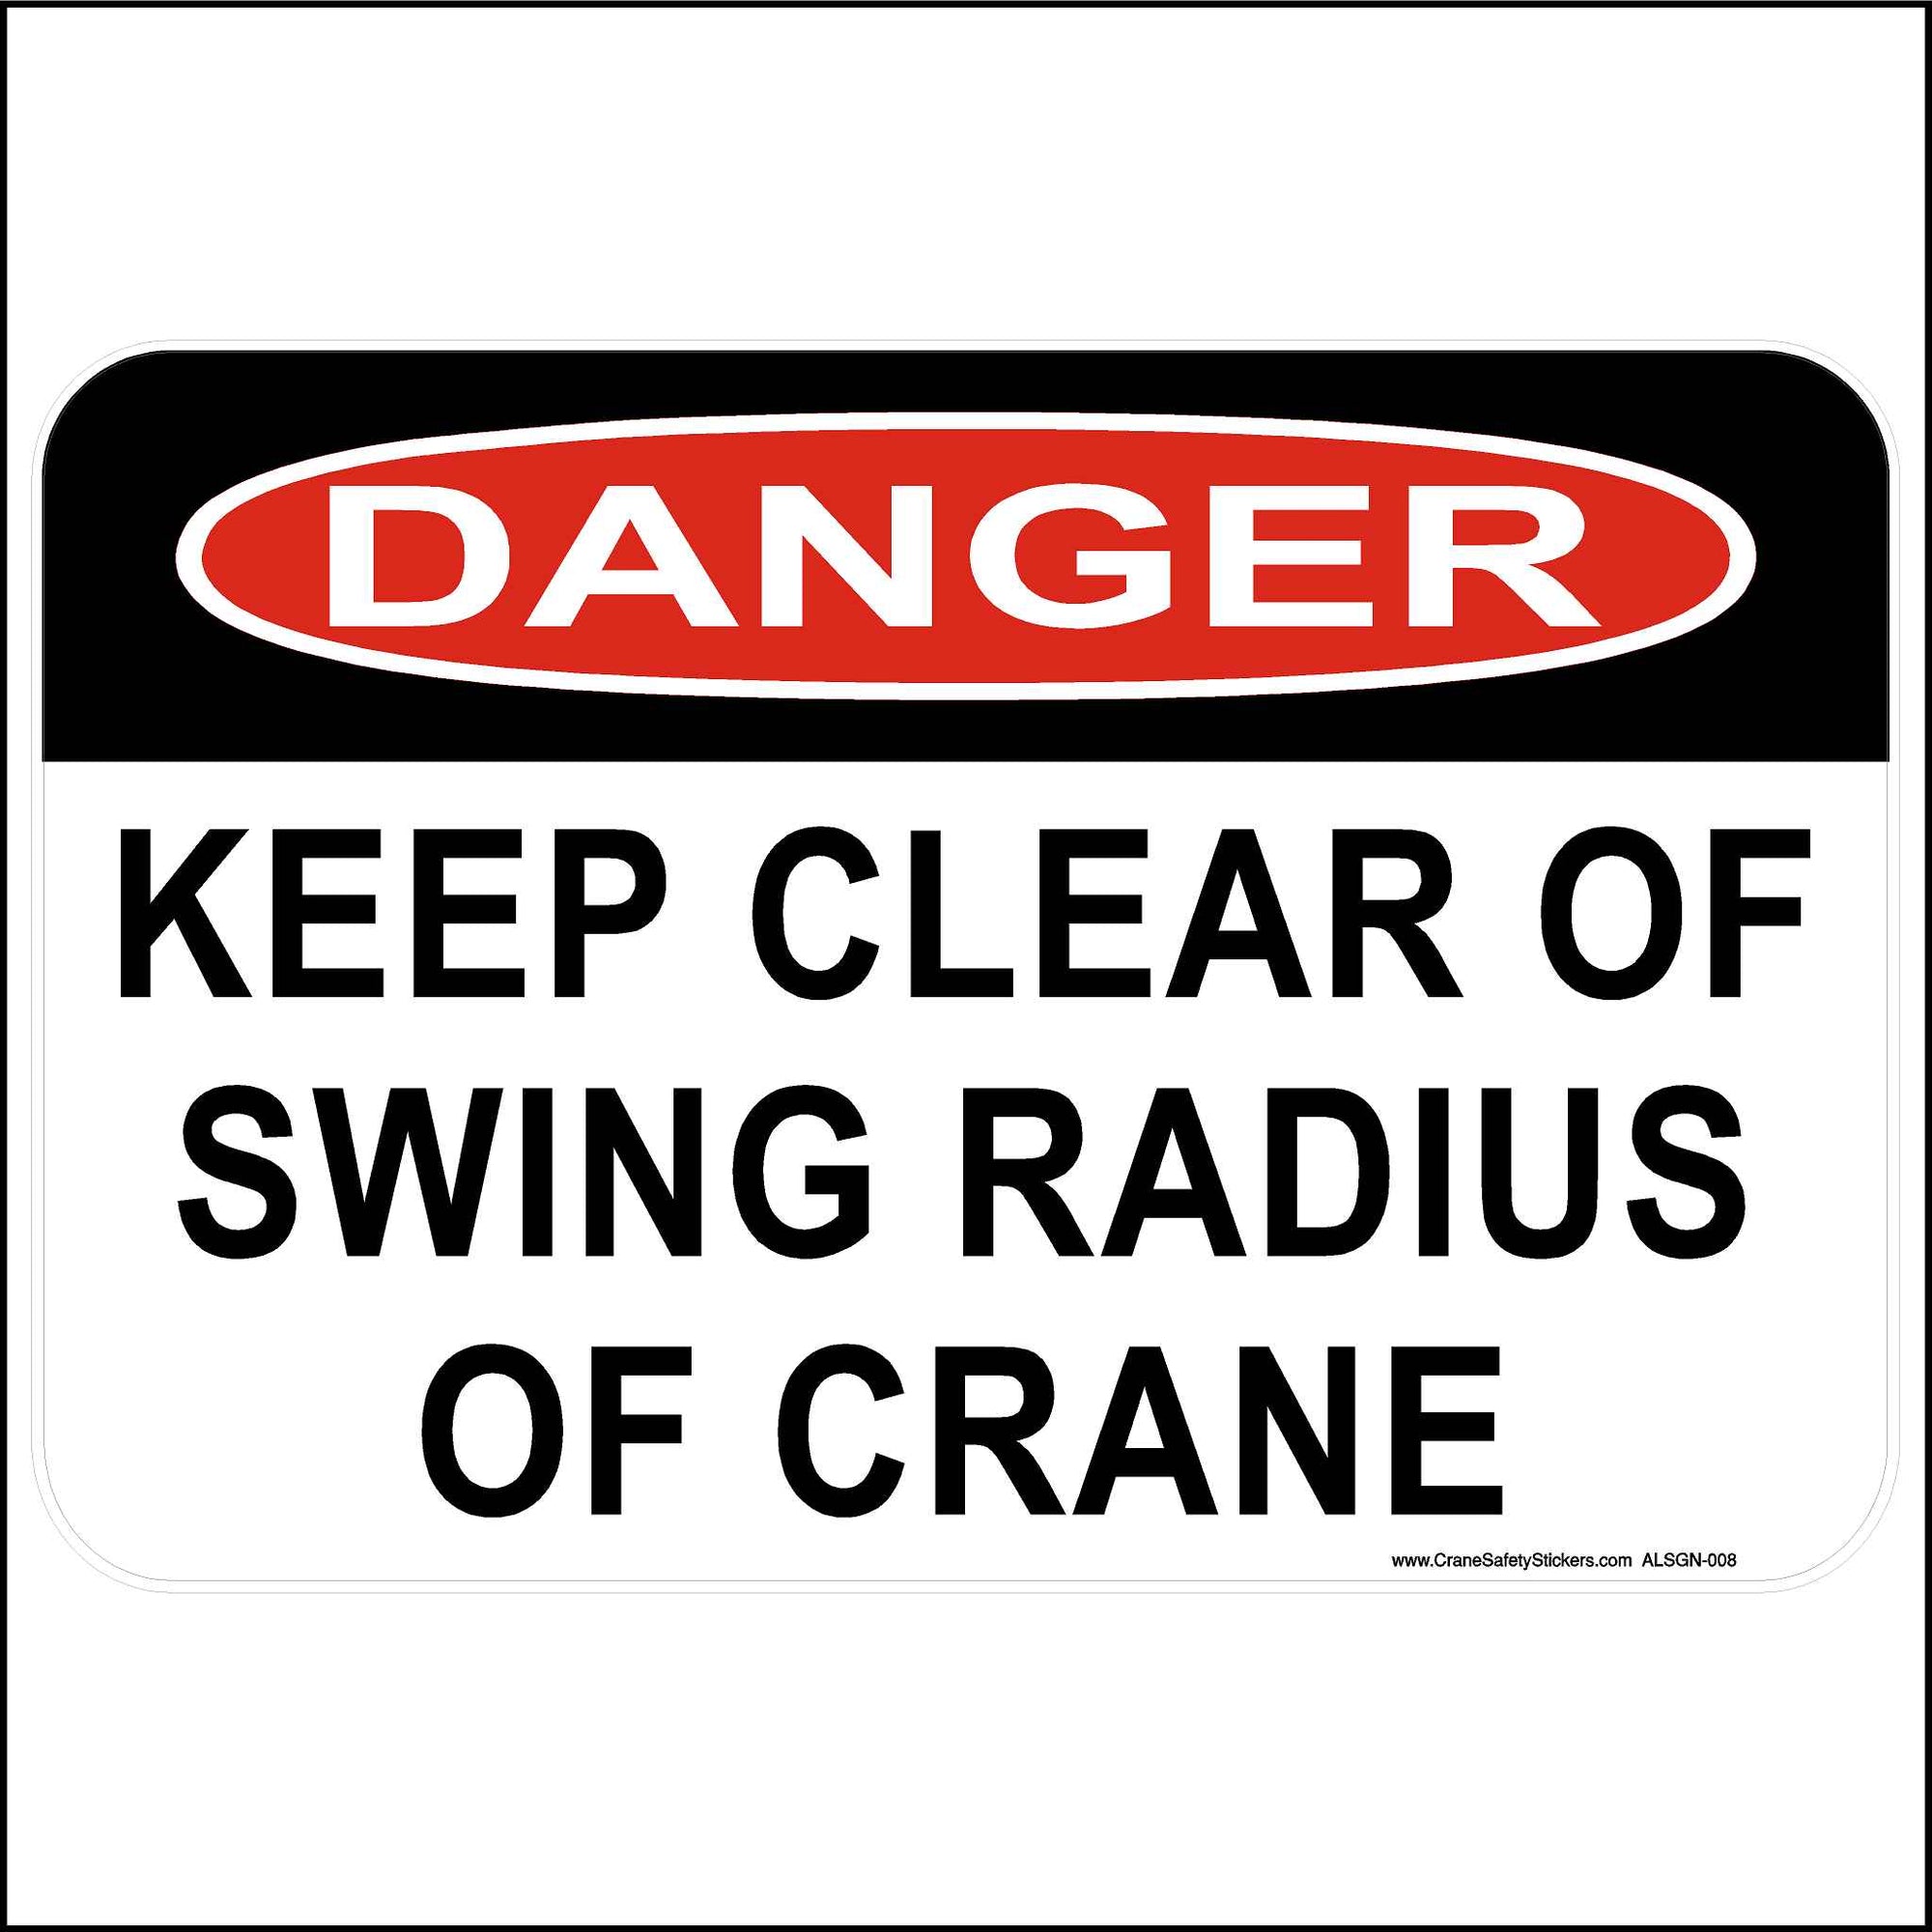 Danger keep clear of swing radius of crane safety sign.